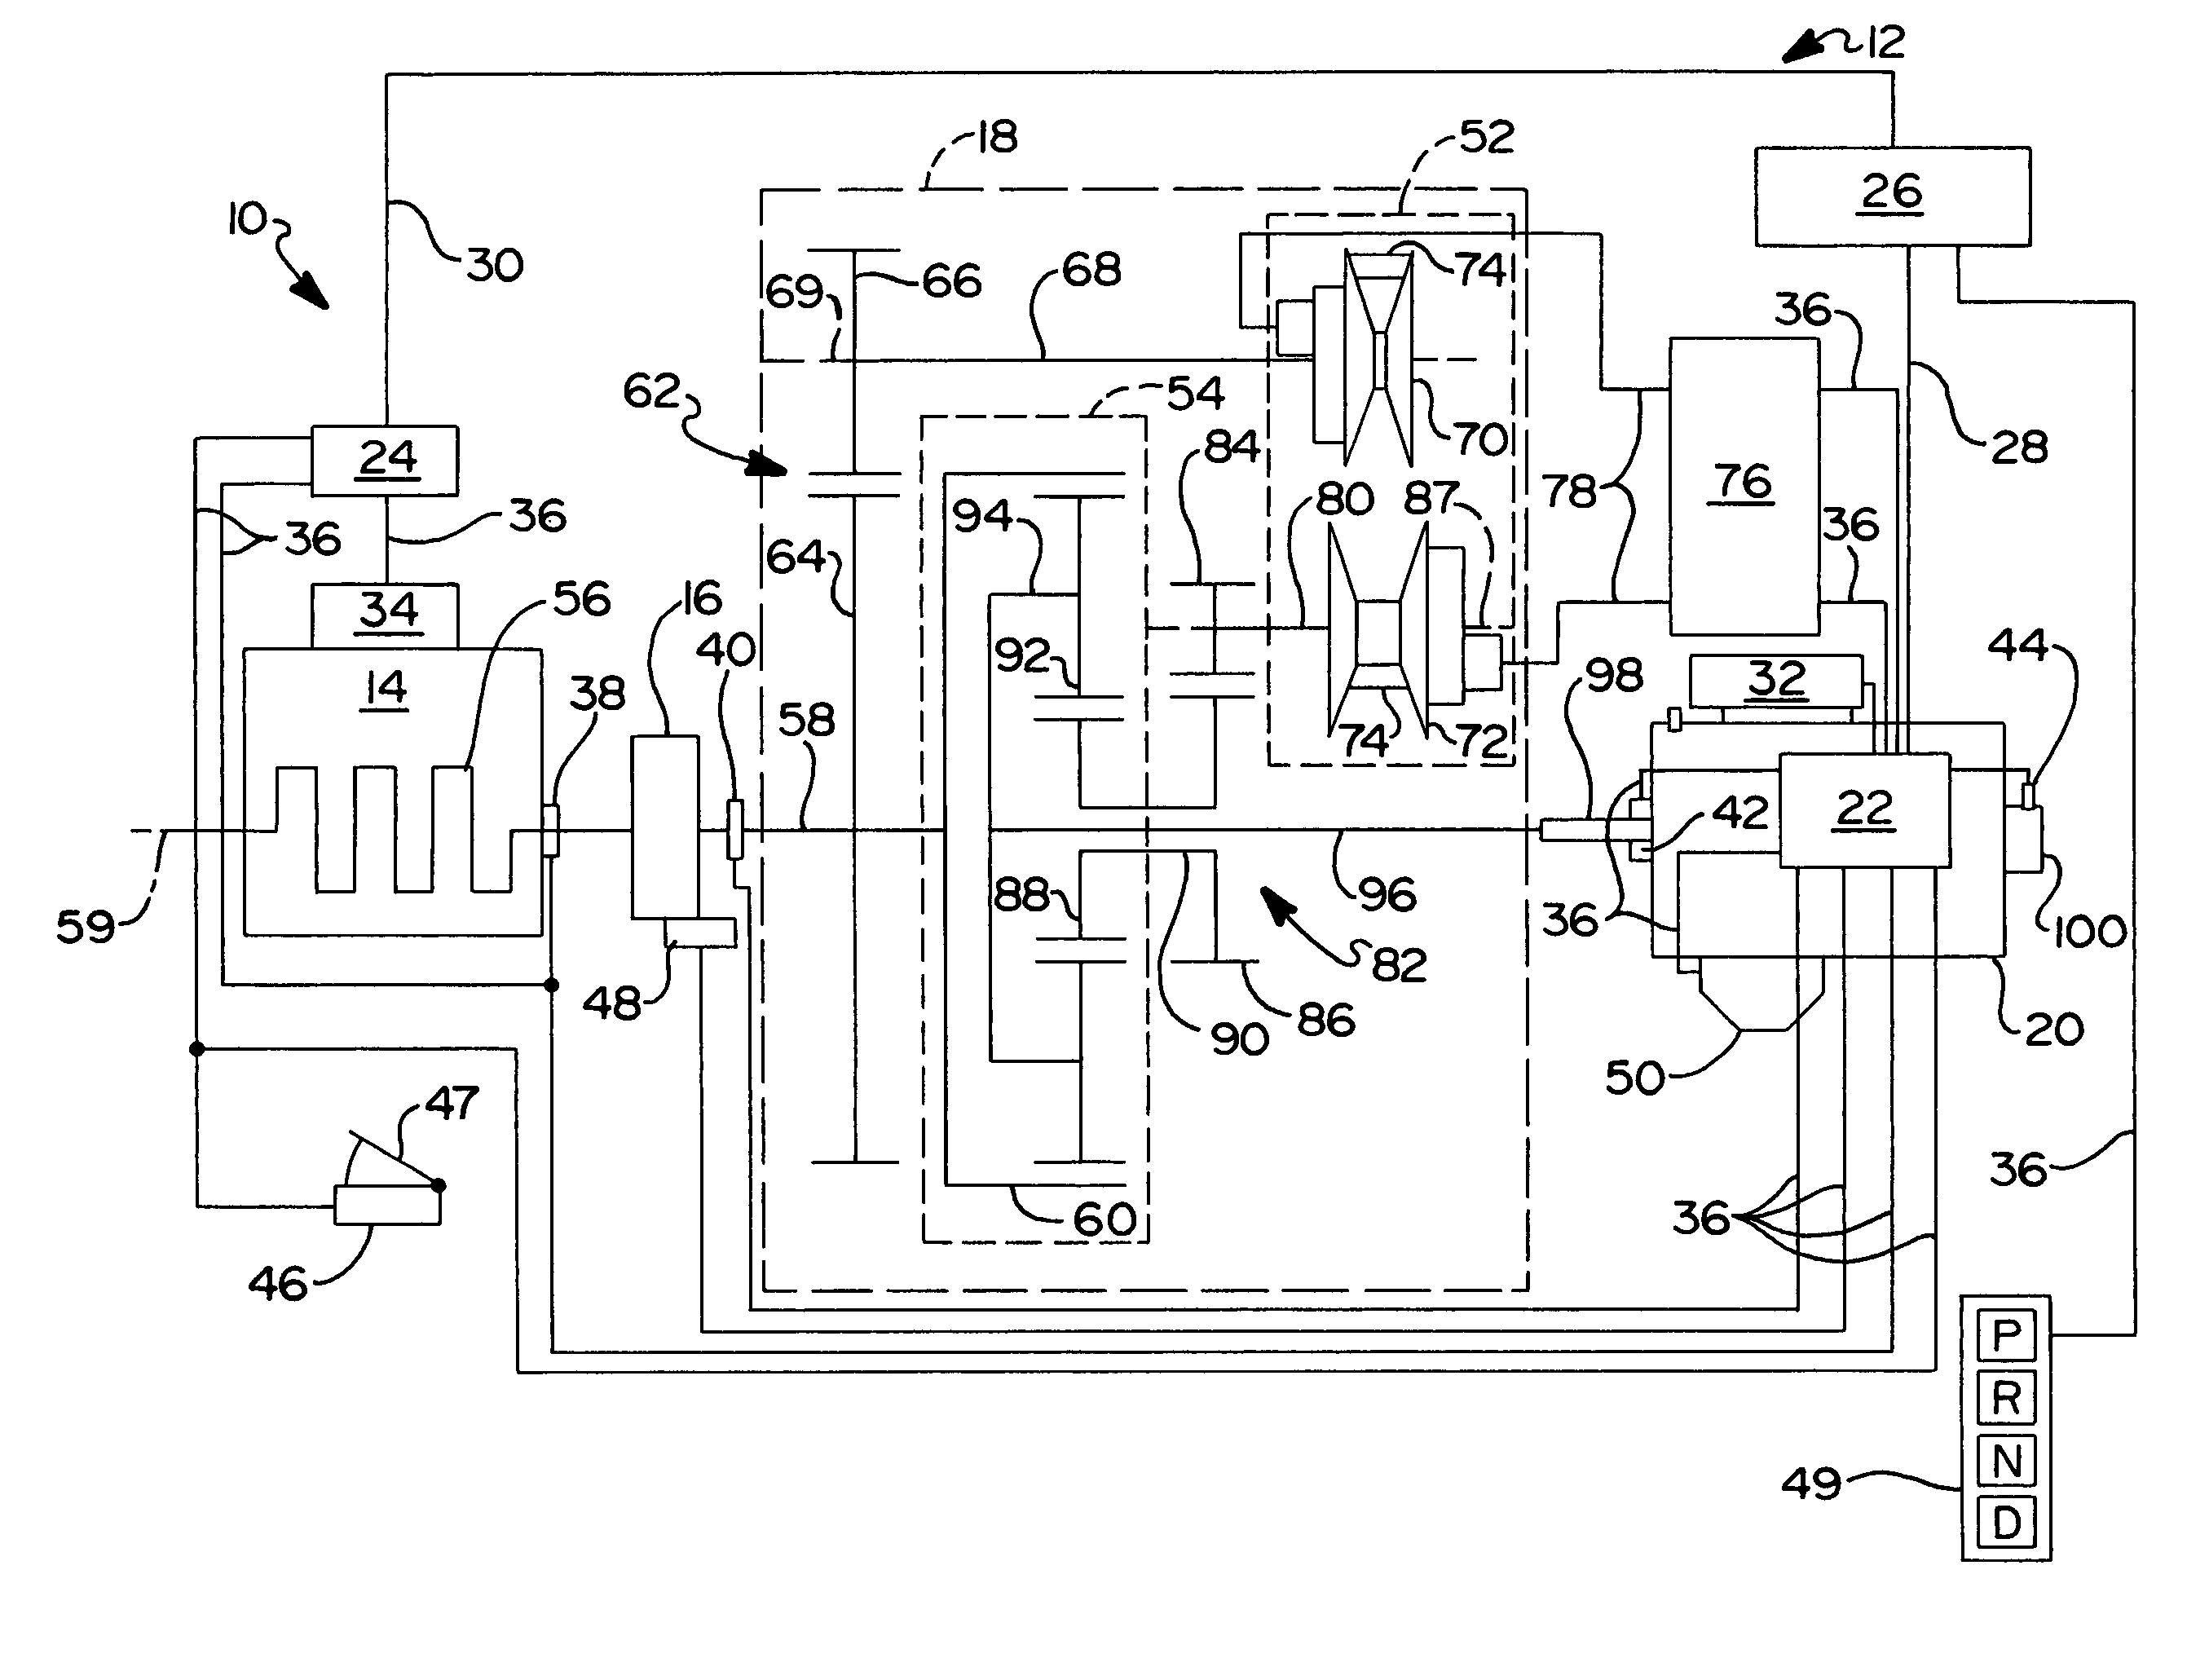 Continuously variable stepped transmission